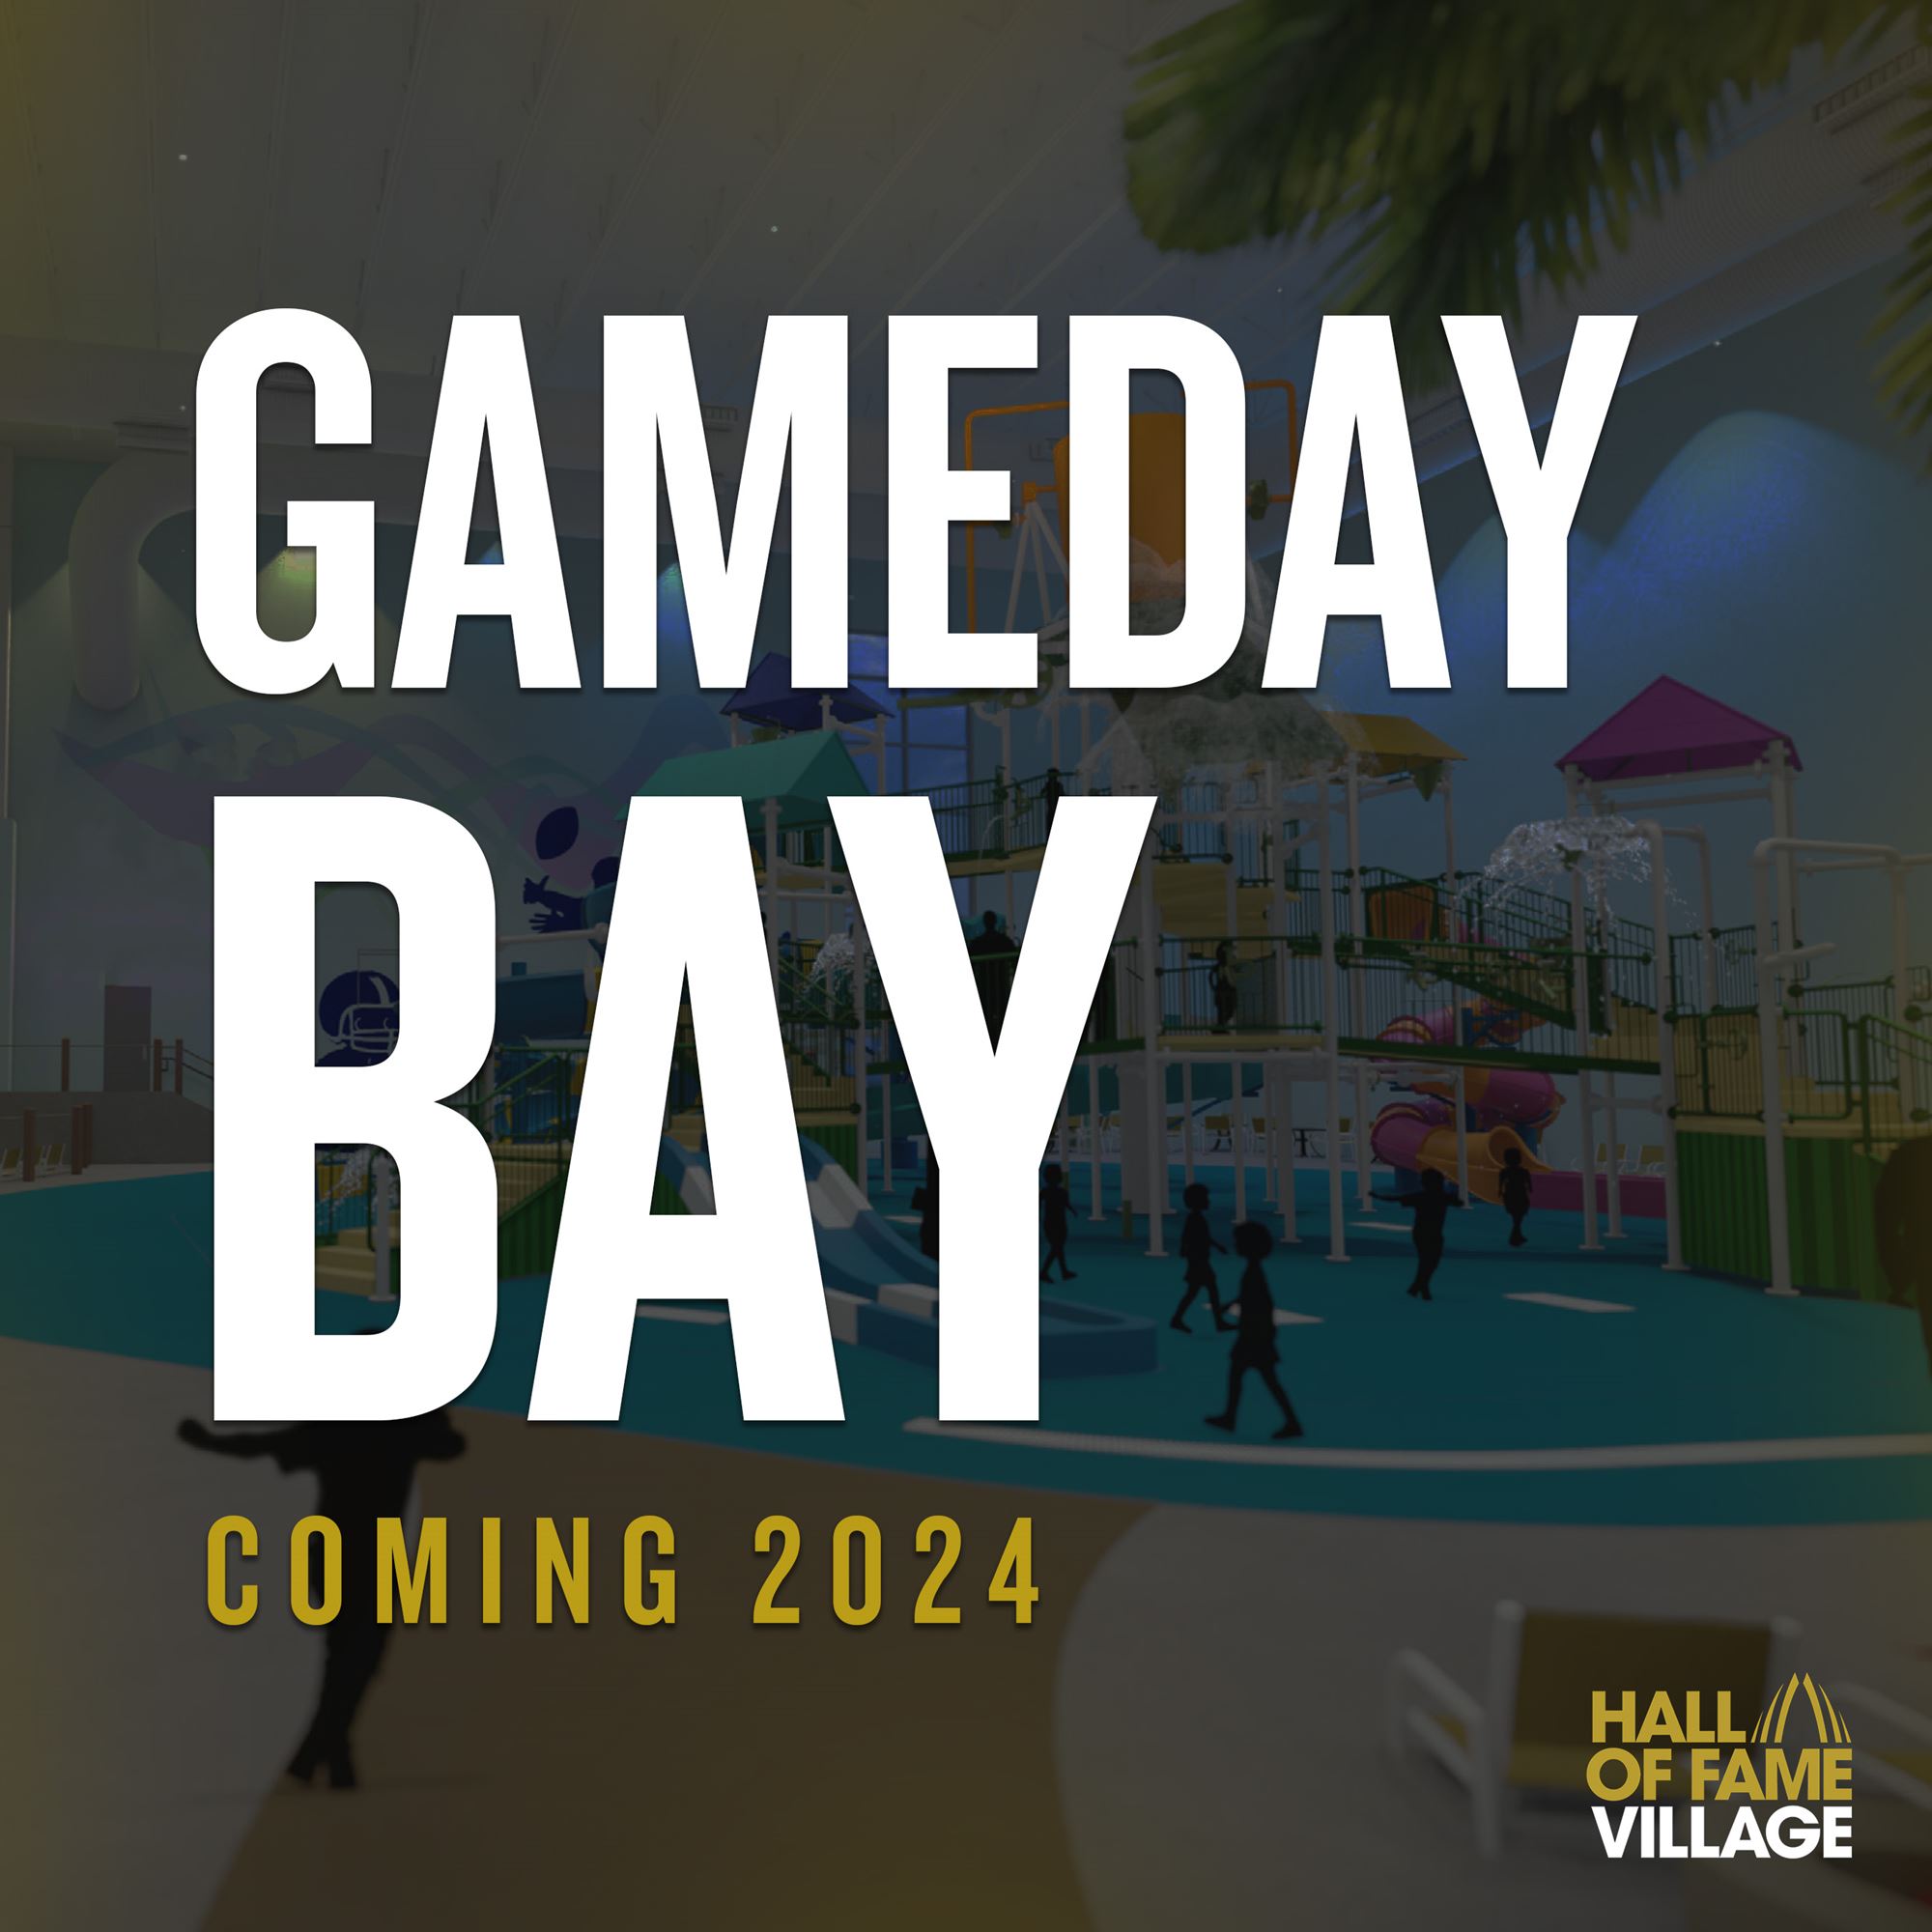 Hall Of Fame Village Unveils Name For Indoor Football-Themed Waterpark: Gameday Bay